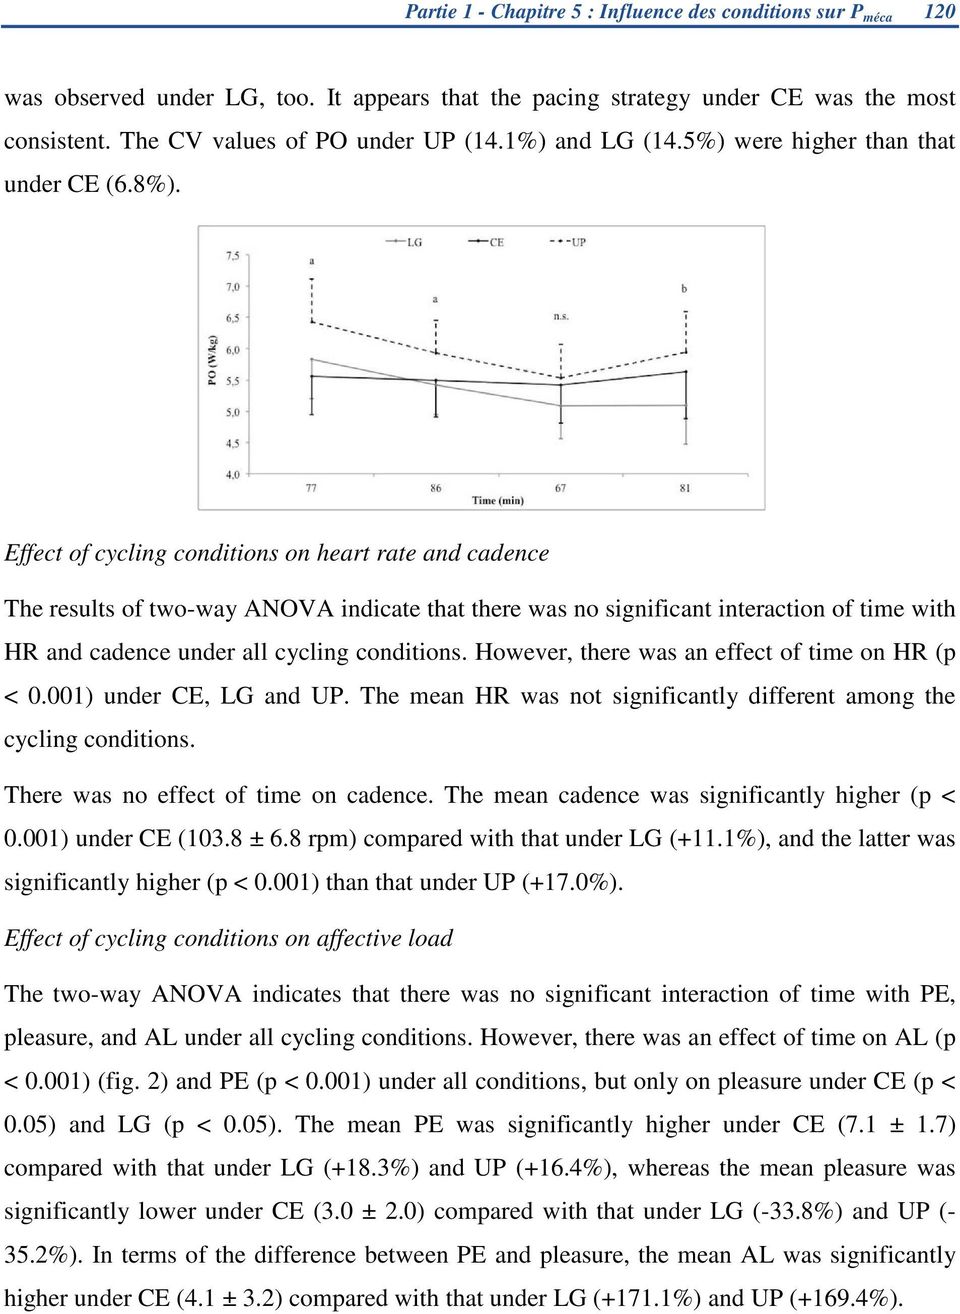 Effect of cycling conditions on heart rate and cadence The results of two-way ANOVA indicate that there was no significant interaction of time with HR and cadence under all cycling conditions.